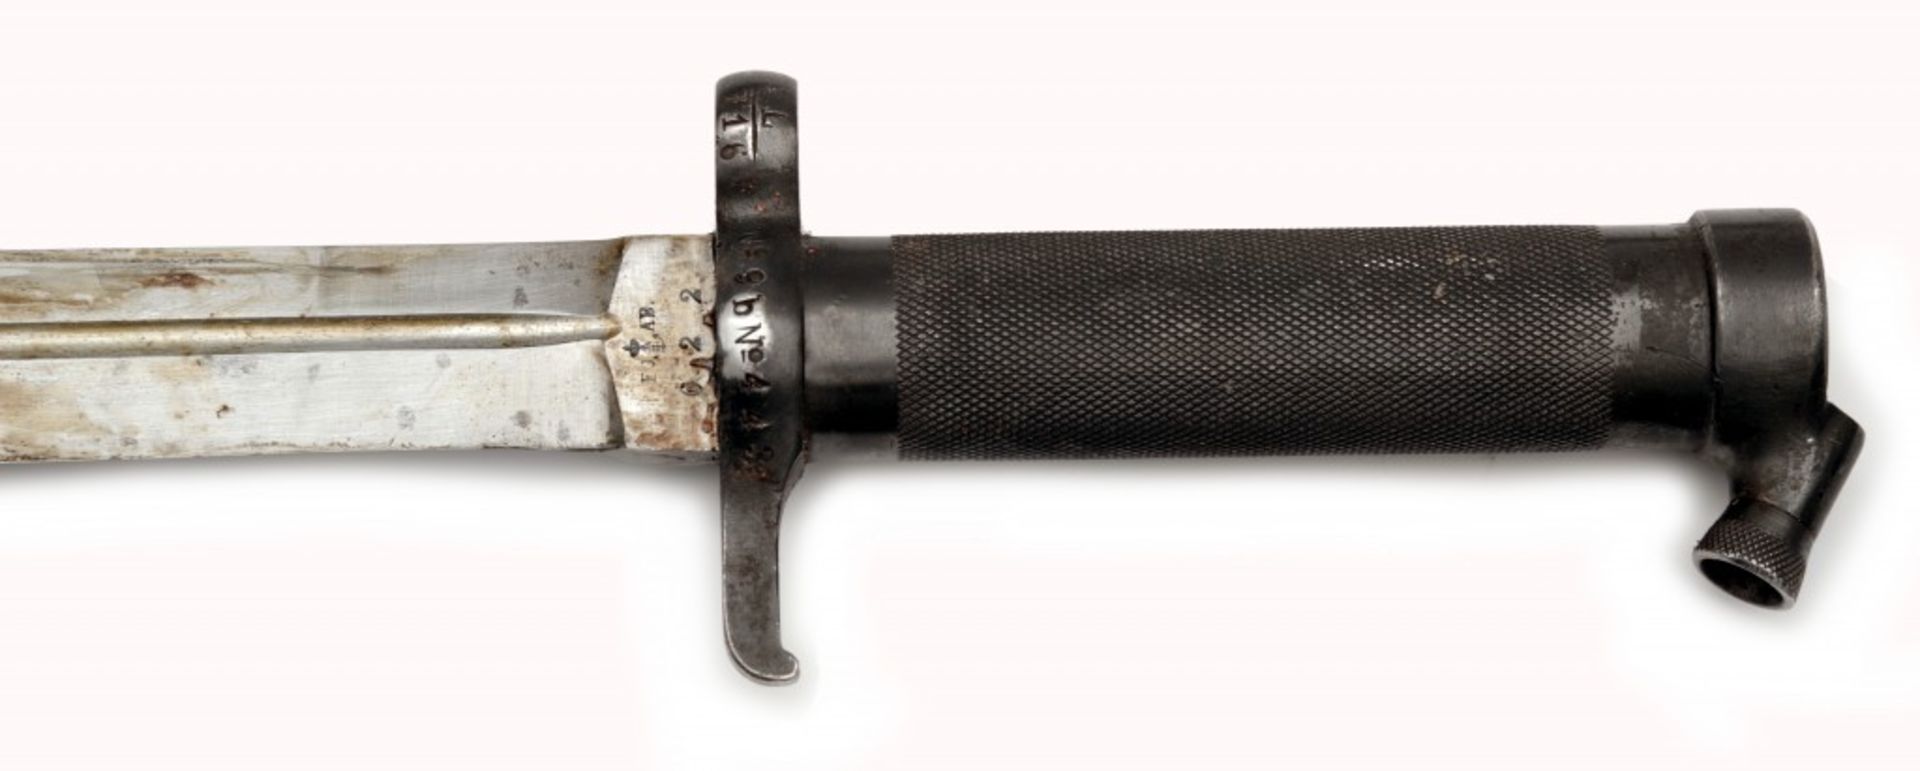 M1896 knife Bayonet for the Swedish Mauser m/1896 - Image 2 of 2